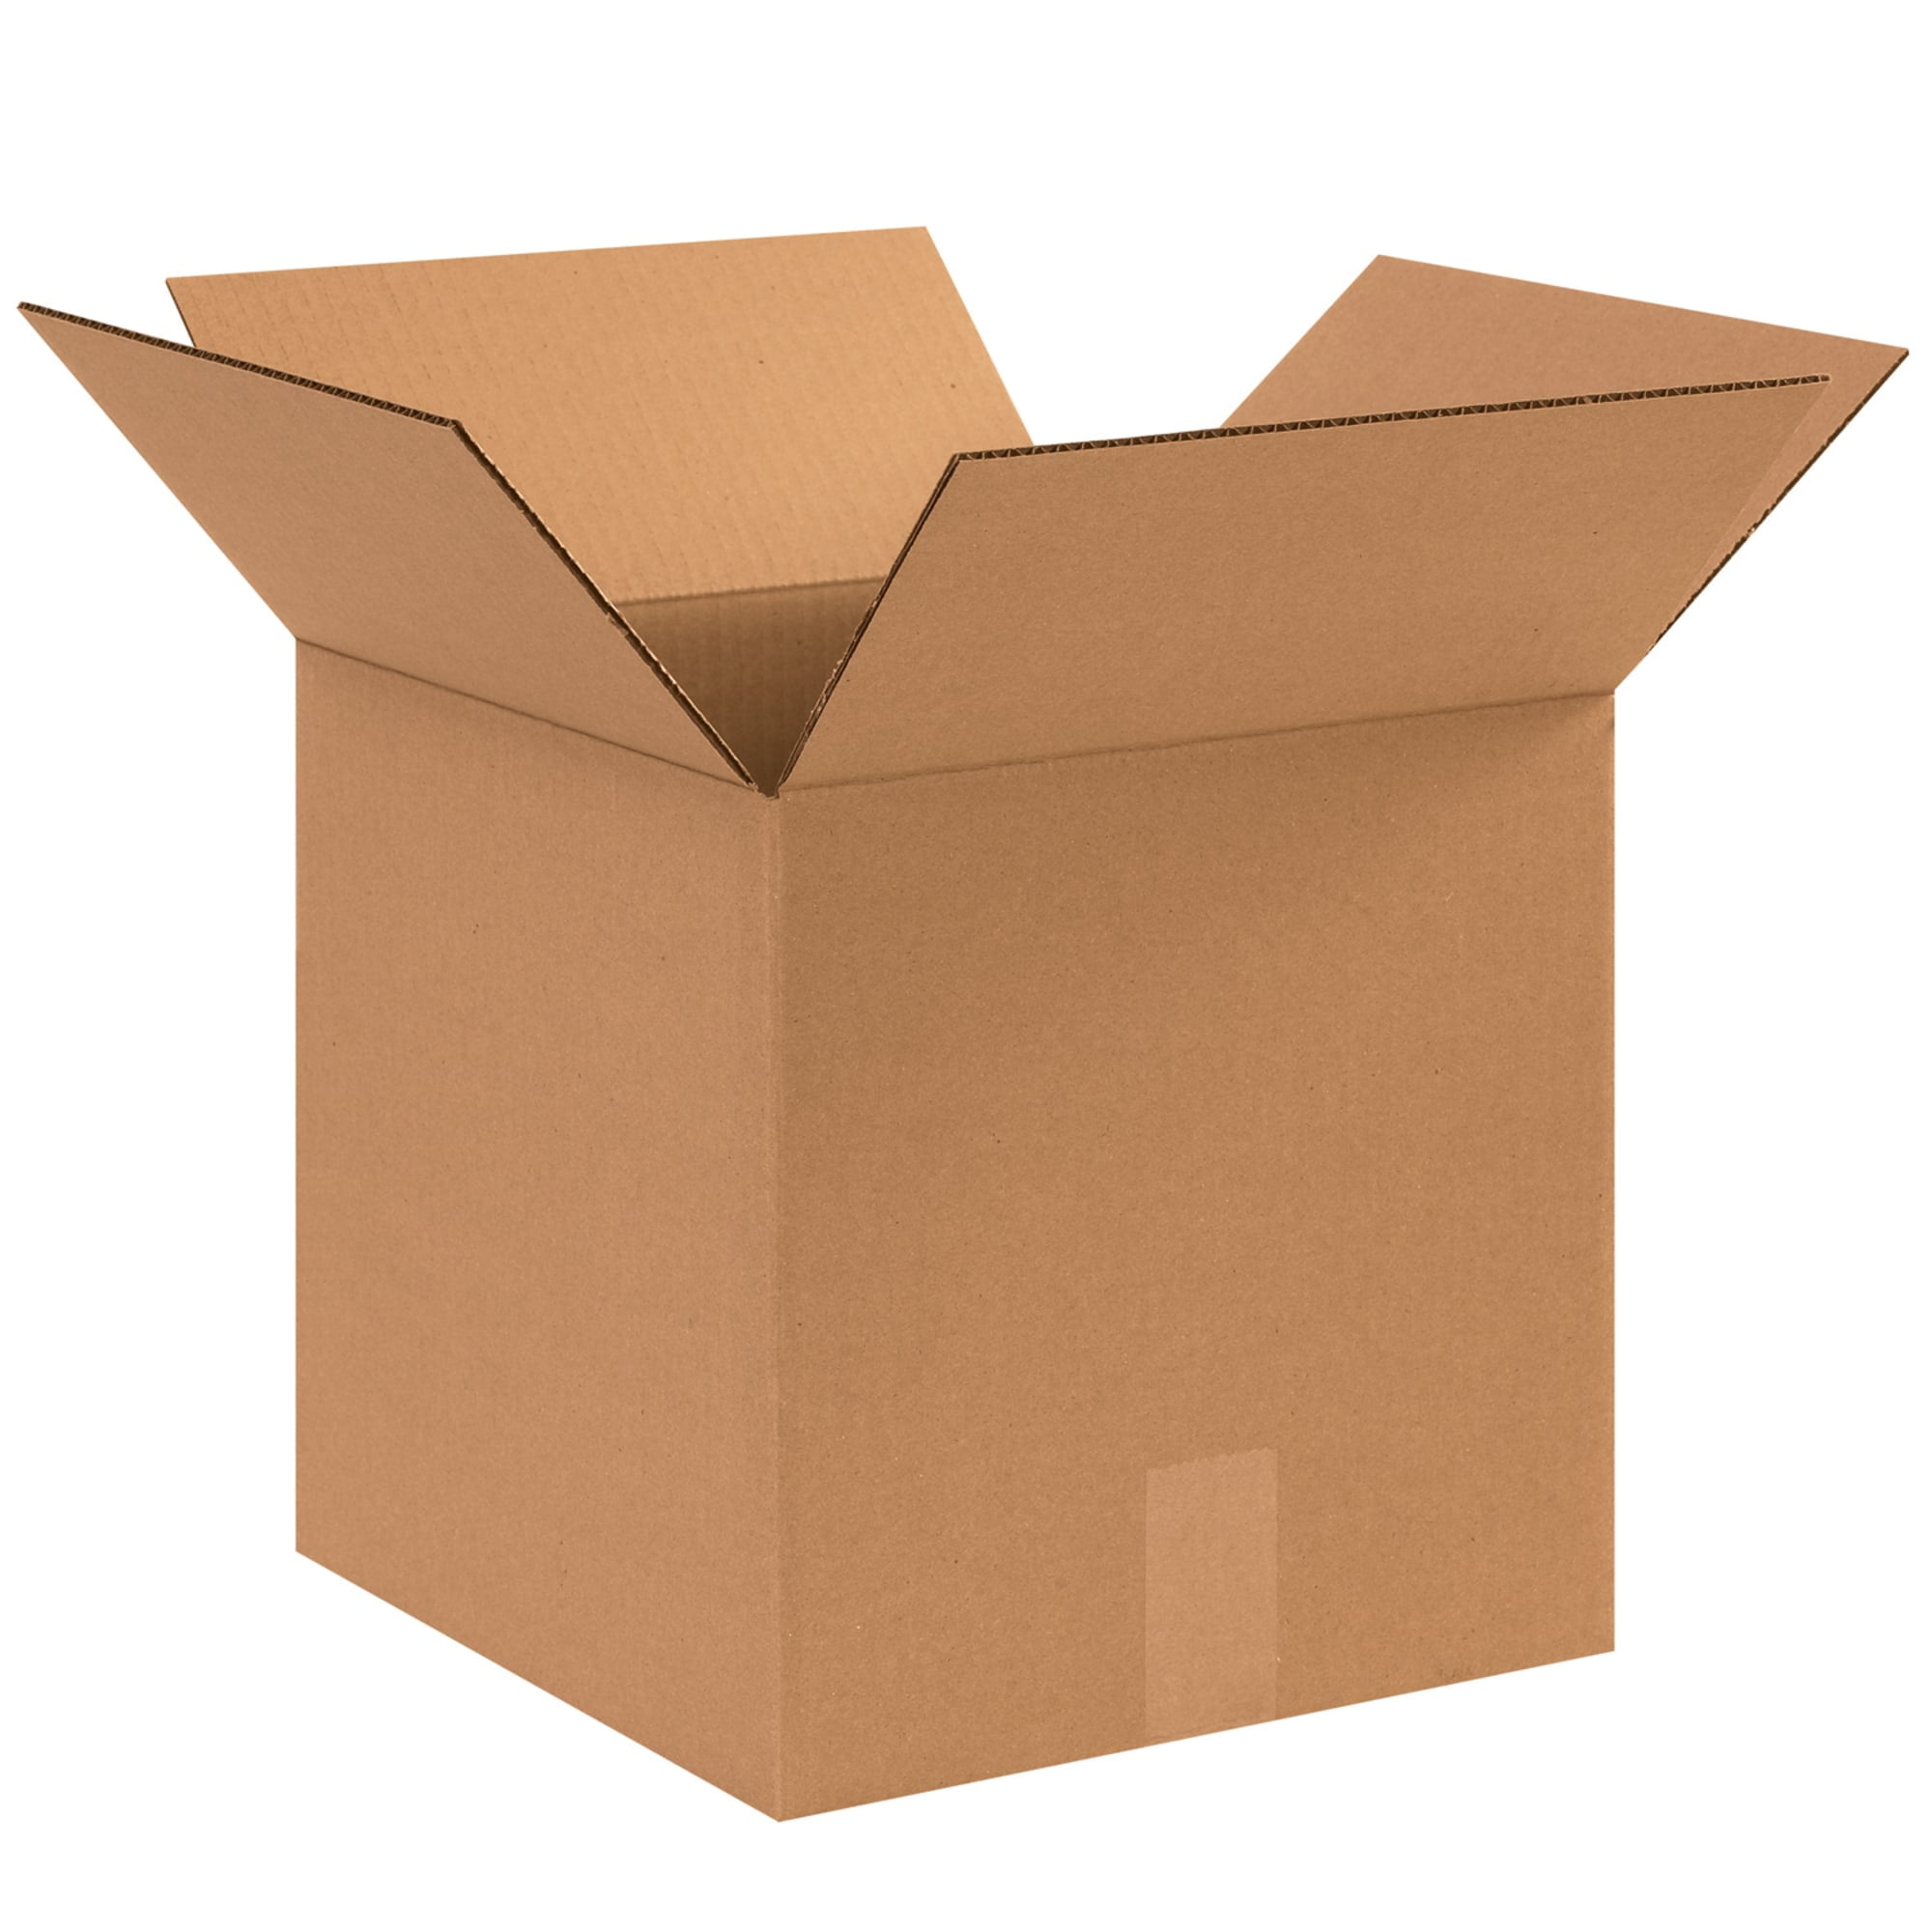 100 10x8x6 Cardboard Paper Boxes Mailing Packing Shipping Box Corrugated 